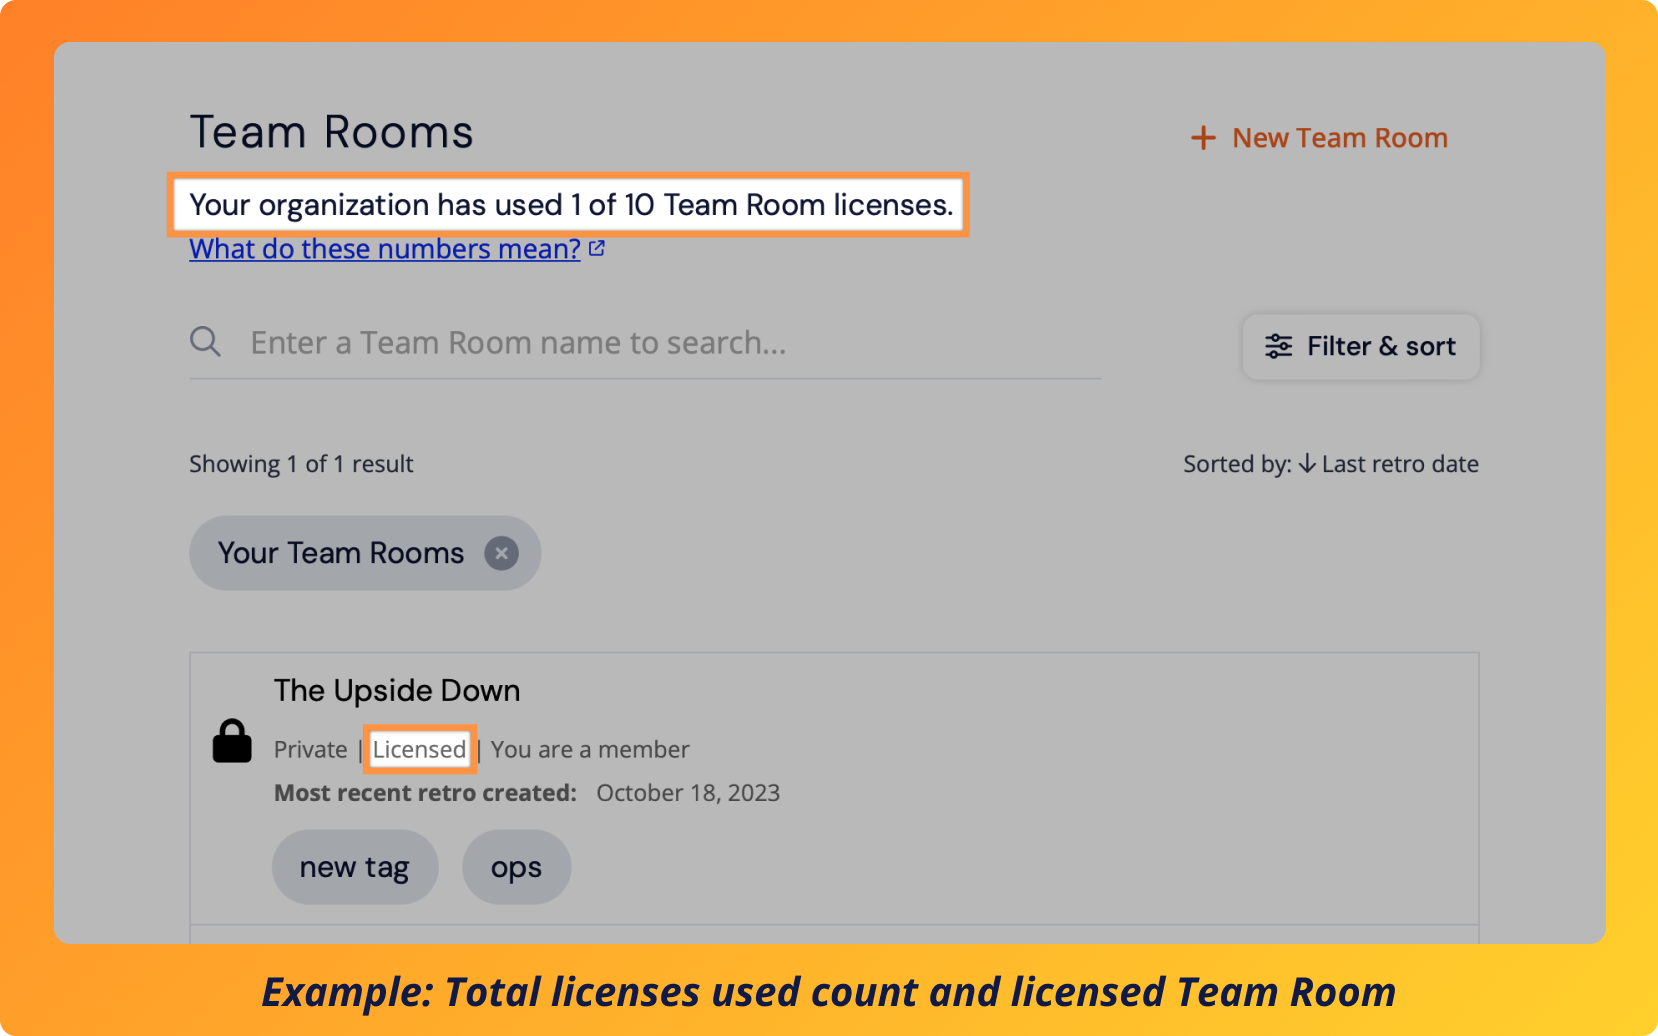 team_room_license_usage_example 1.png